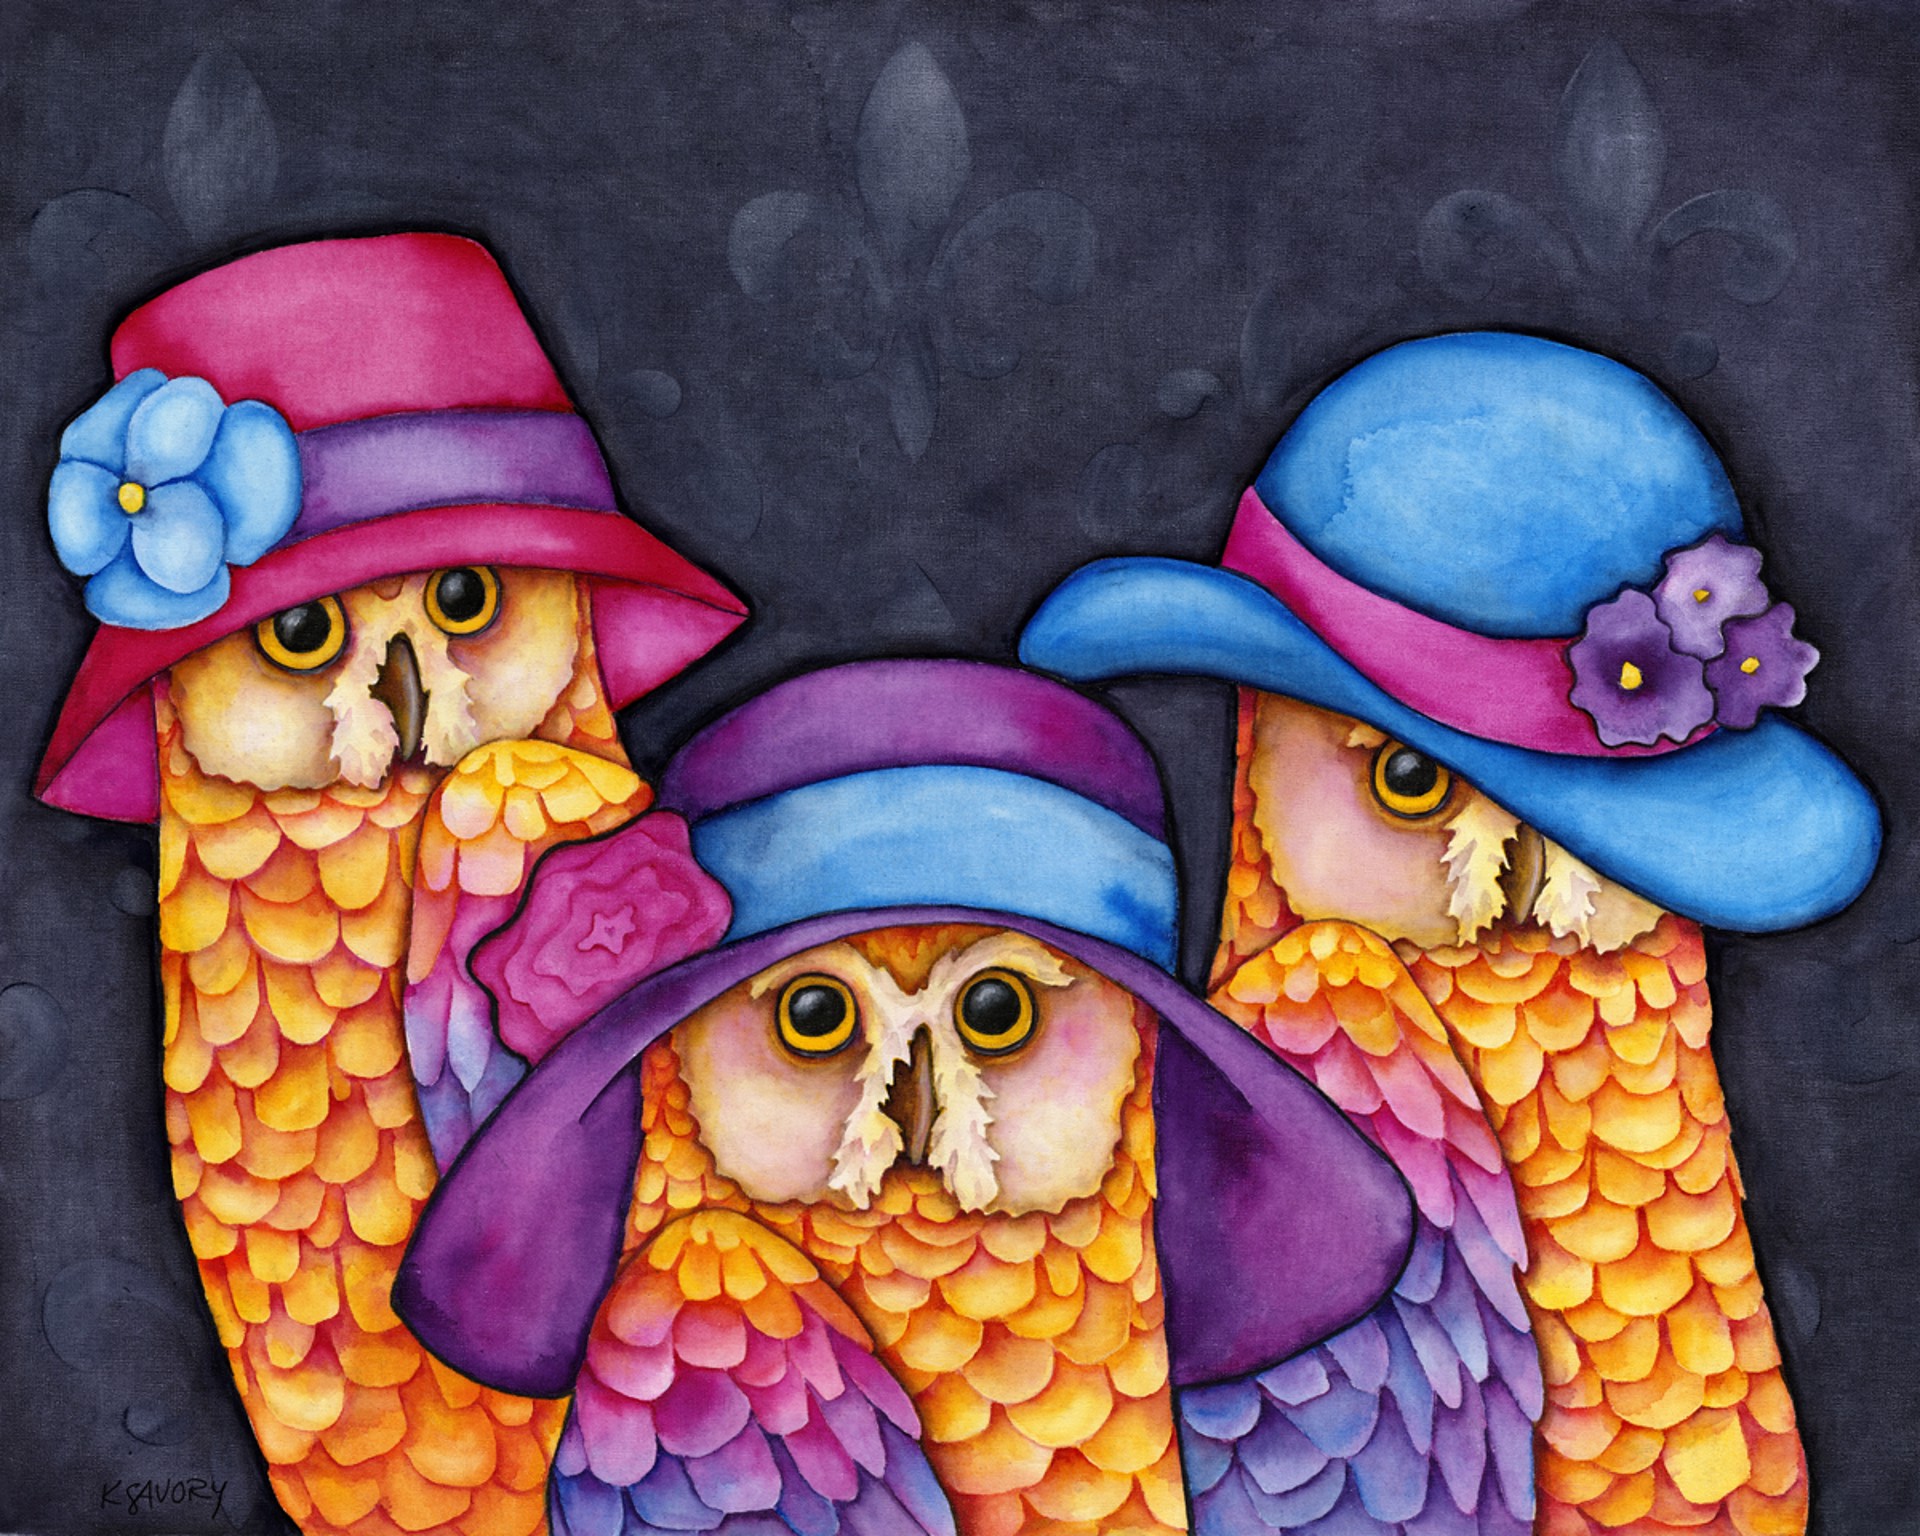 The Rare Hooded Owls of Whooville by Karen Savory